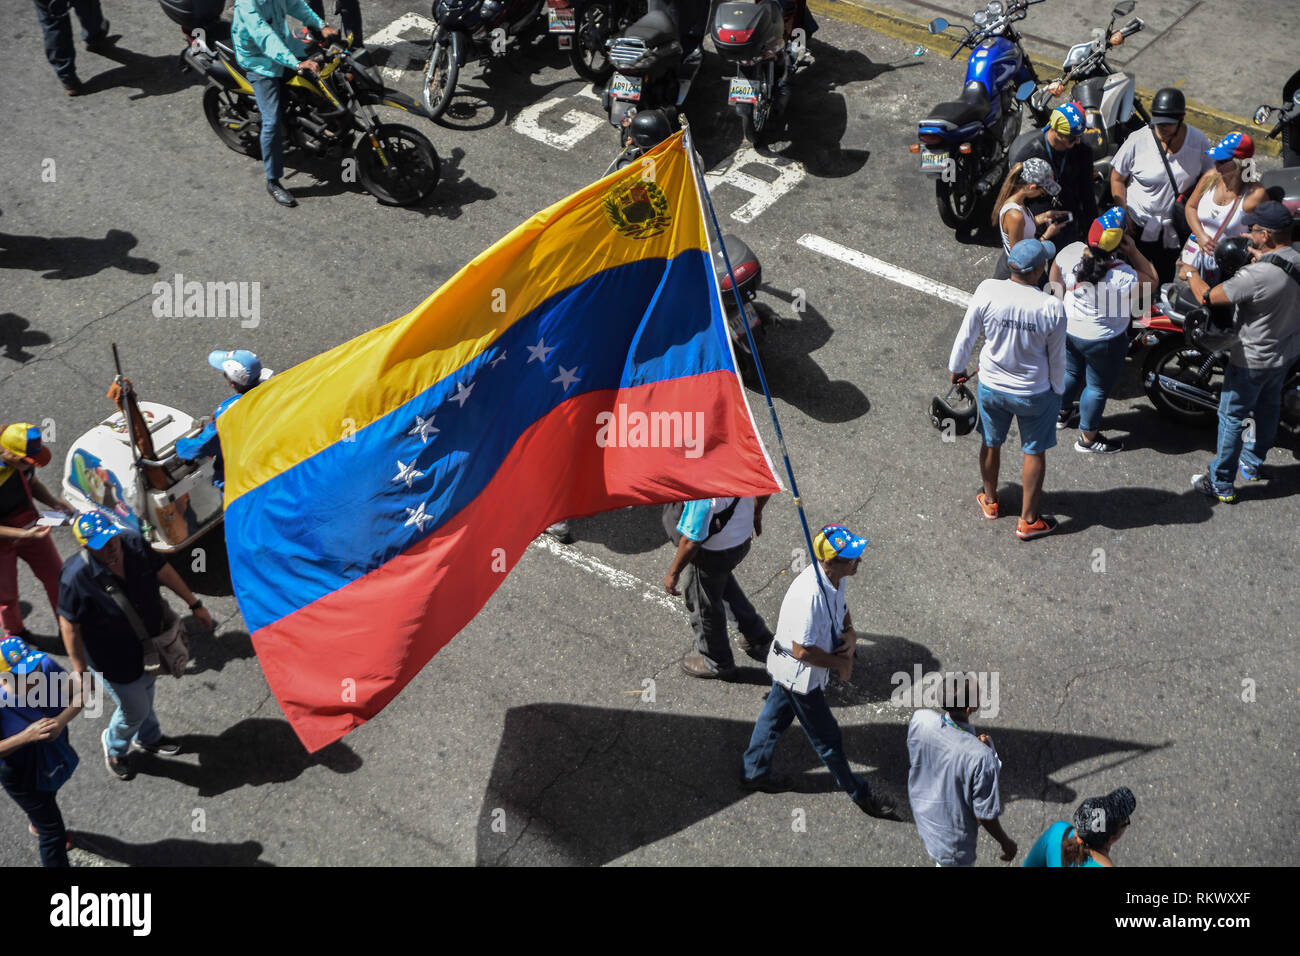 A man seen waving a huge flag of Venezuela during a protest to call for a change in the government. Opponents gather at a protest organised by the PSUV (United Socialist Party of Venezuela) after the call from interim president Juan Guaido, to show their support to him, while asking the army to allow more humanitarian aids into the country. Stock Photo